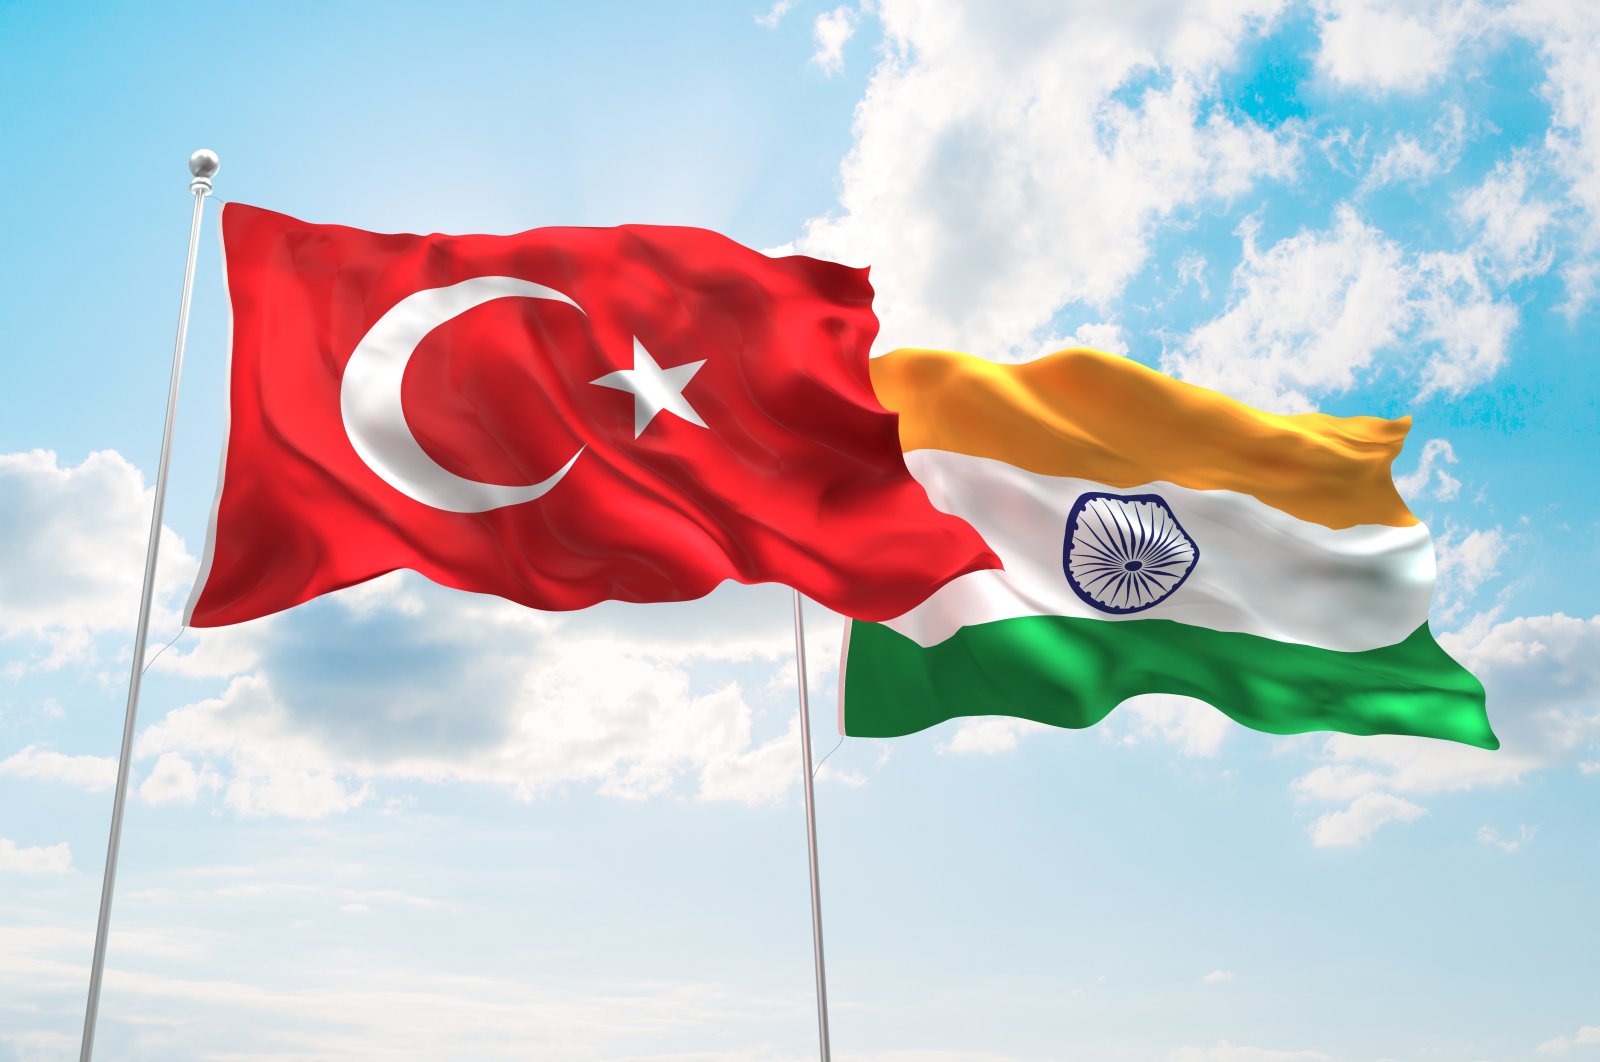 The Turkish and Indian flags wave in the wind. (Shutterstock Photo)